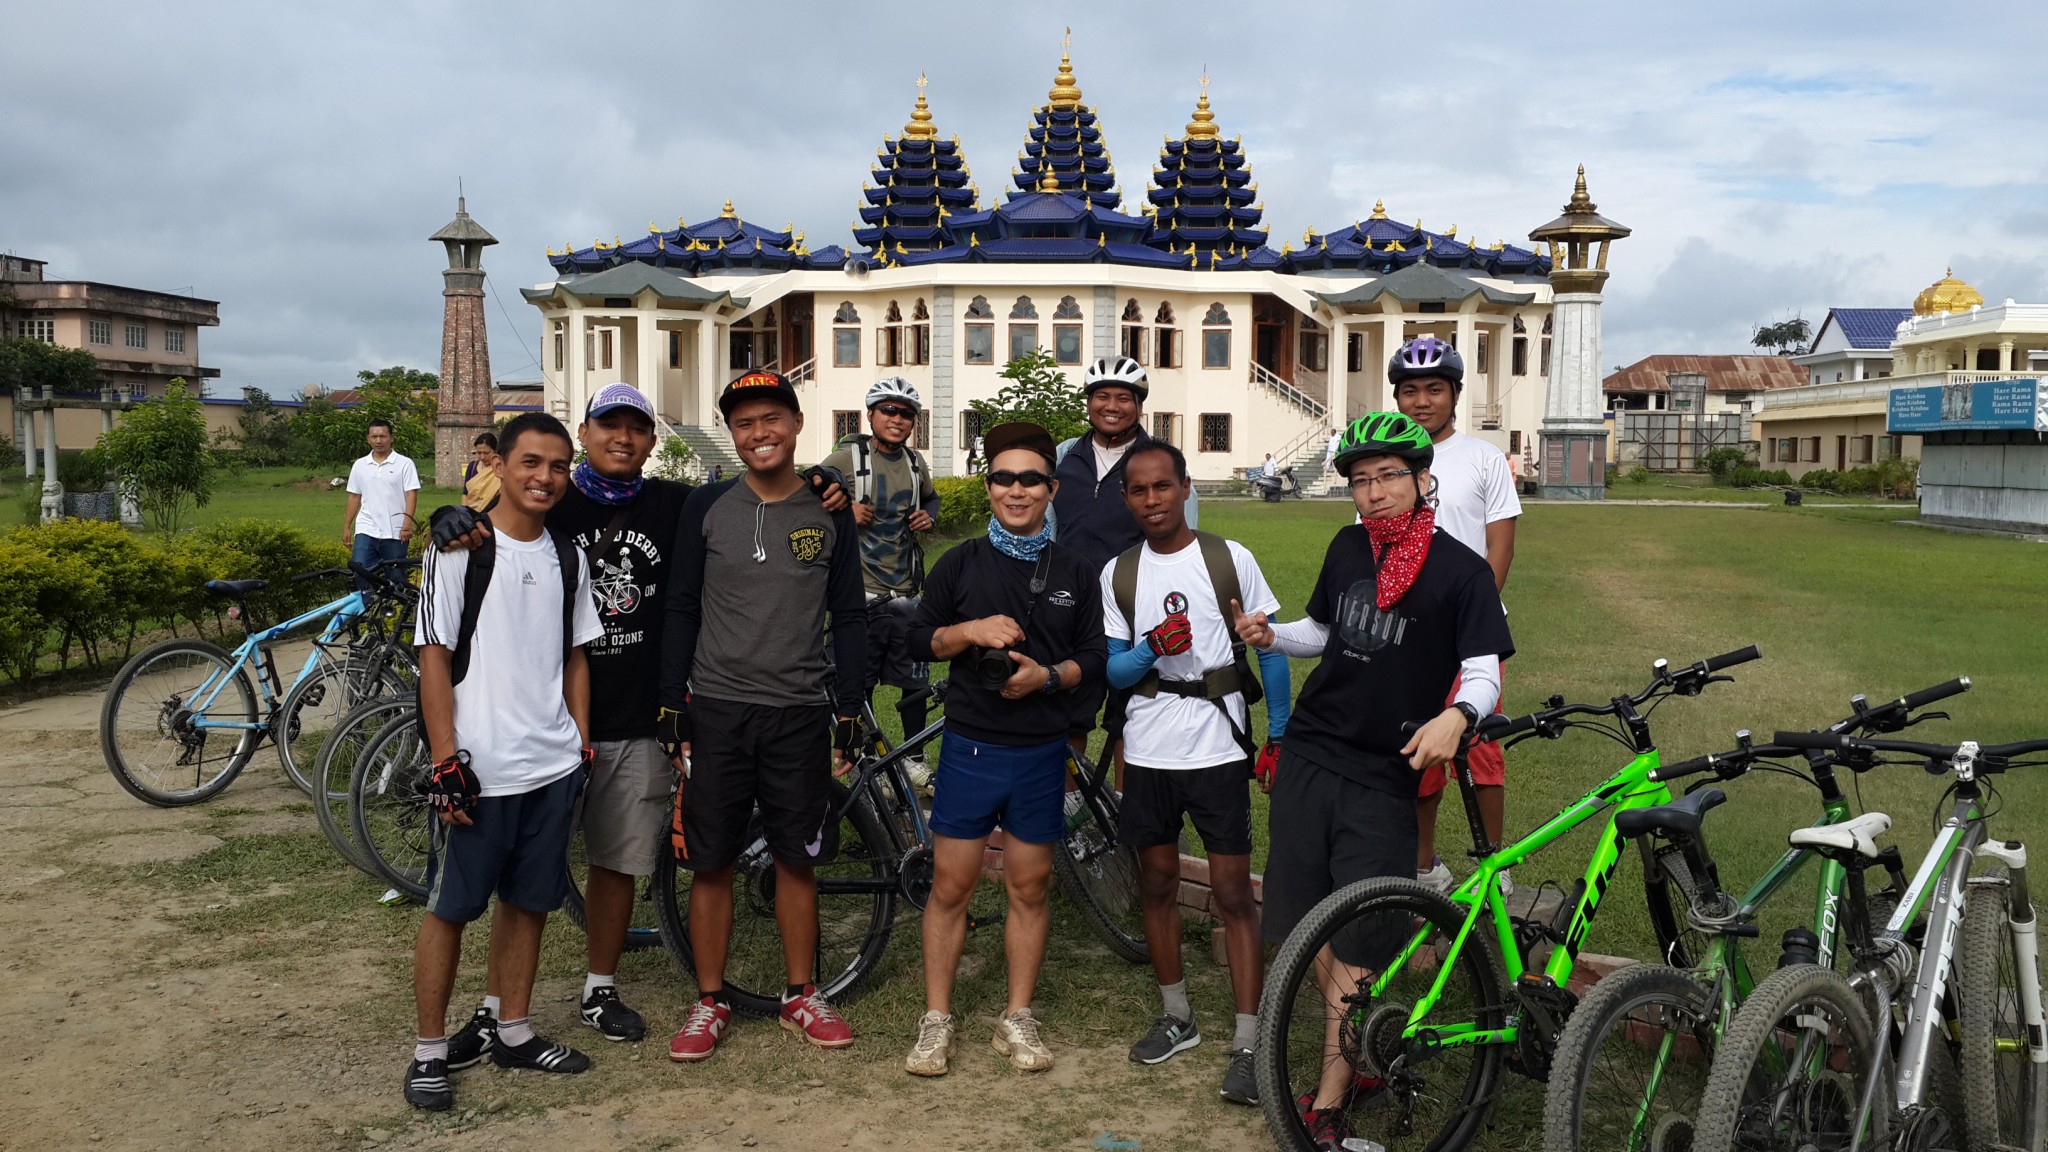 Some of the Pedal Attach boys outside the Krisha Temple in Imphal.